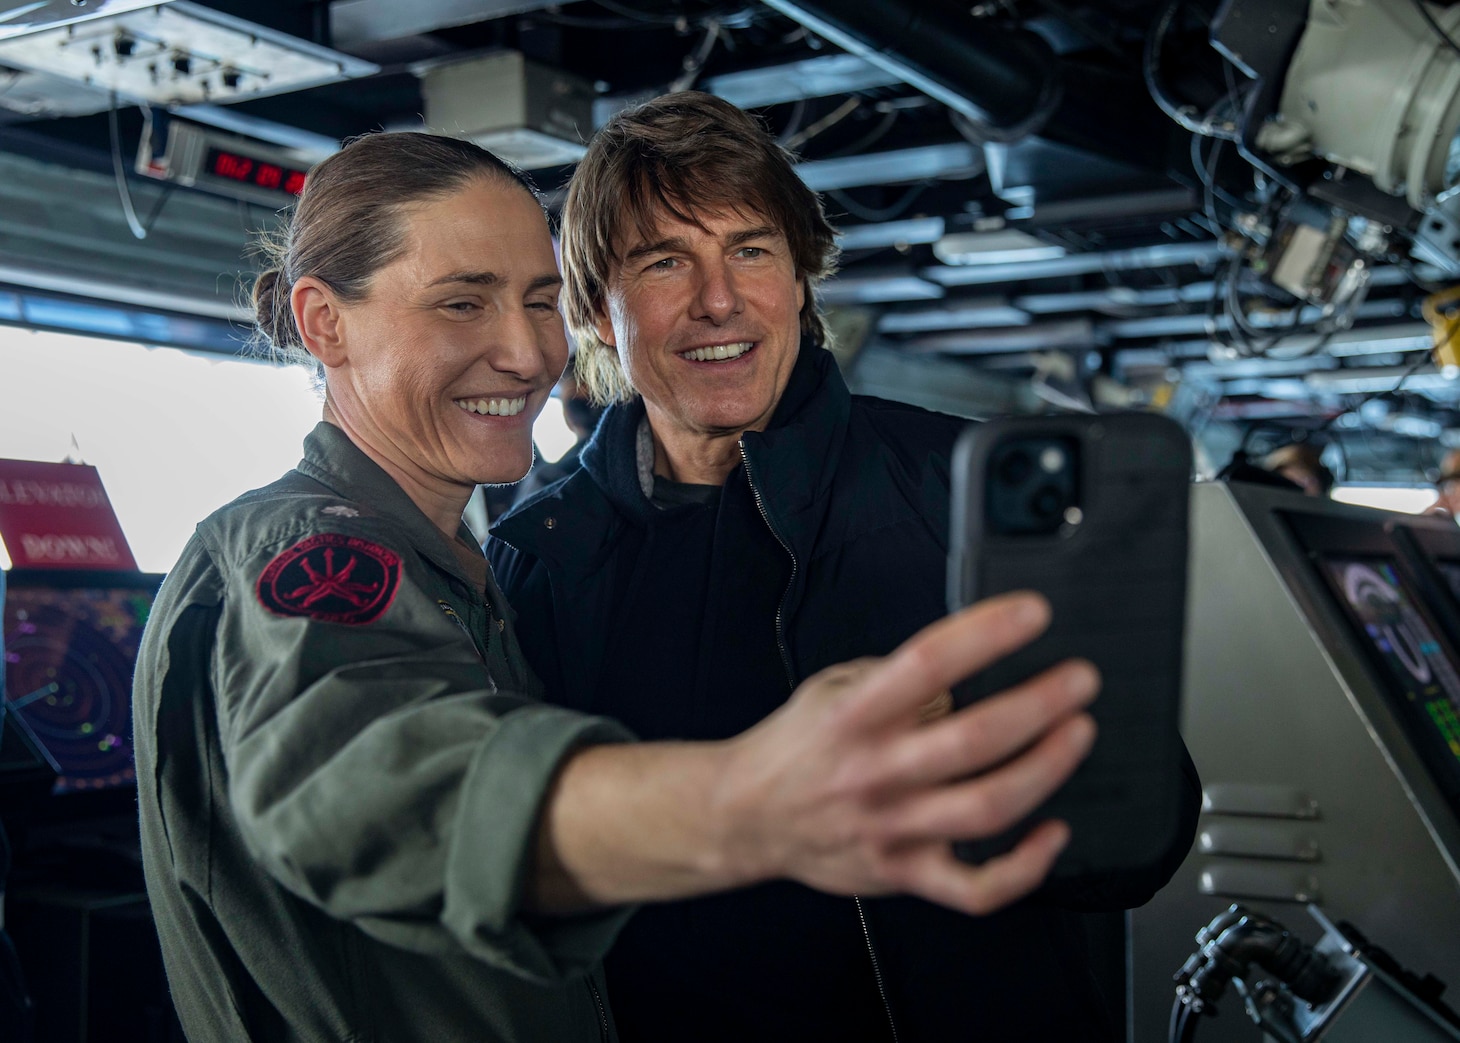 (March 3, 2023) Cmdr. Karrie Lang, Combat Systems Officer aboard the Nimitz-class aircraft carrier USS George H. W. Bush (CVN 77), takes a selfie with Tom Cruise during a visit to the ship, March 3, 2023. The George H.W. Bush Carrier Strike Group is on a scheduled deployment in the U.S. Naval Forces Europe area of operations, employed by U.S. Sixth Fleet to defend U.S., allied and partner interests.